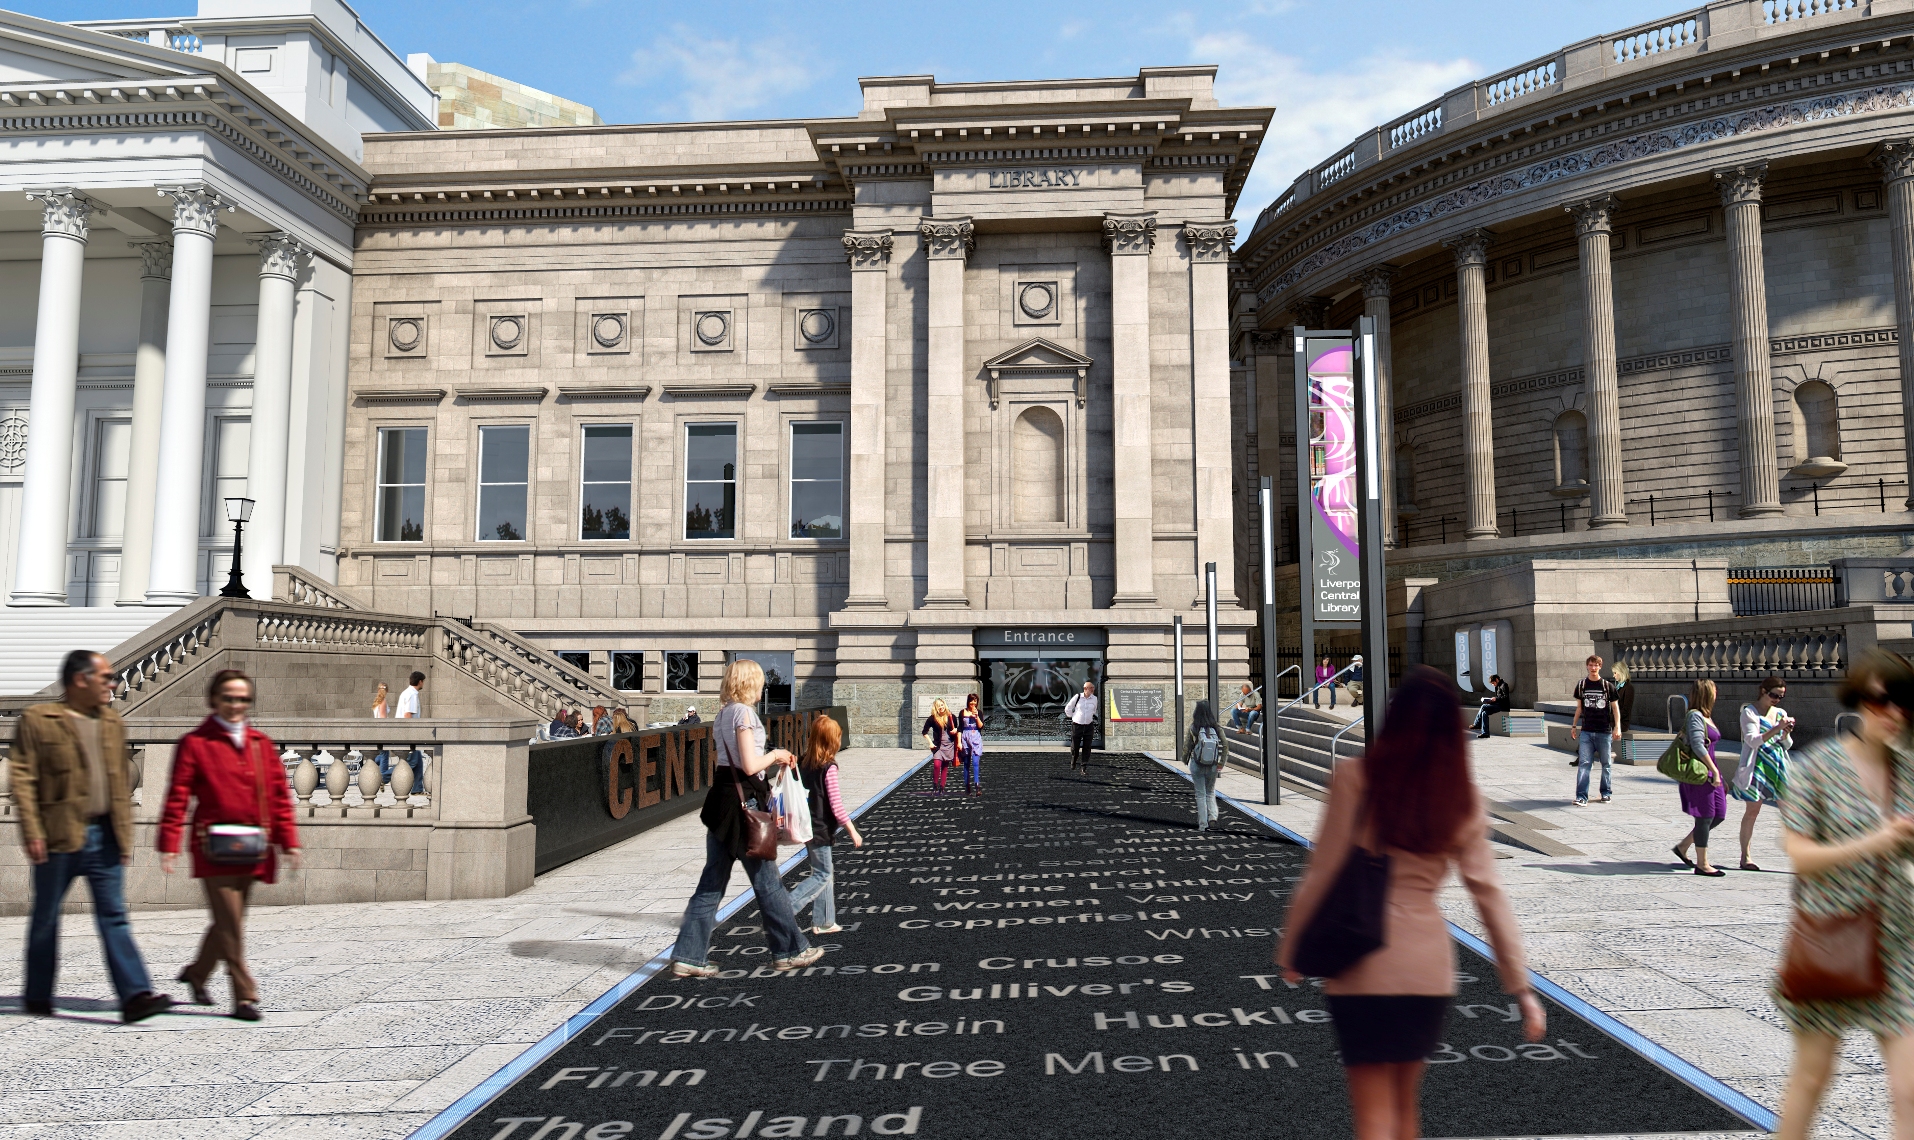 Liverpool Central Library - Entrance Forecourt